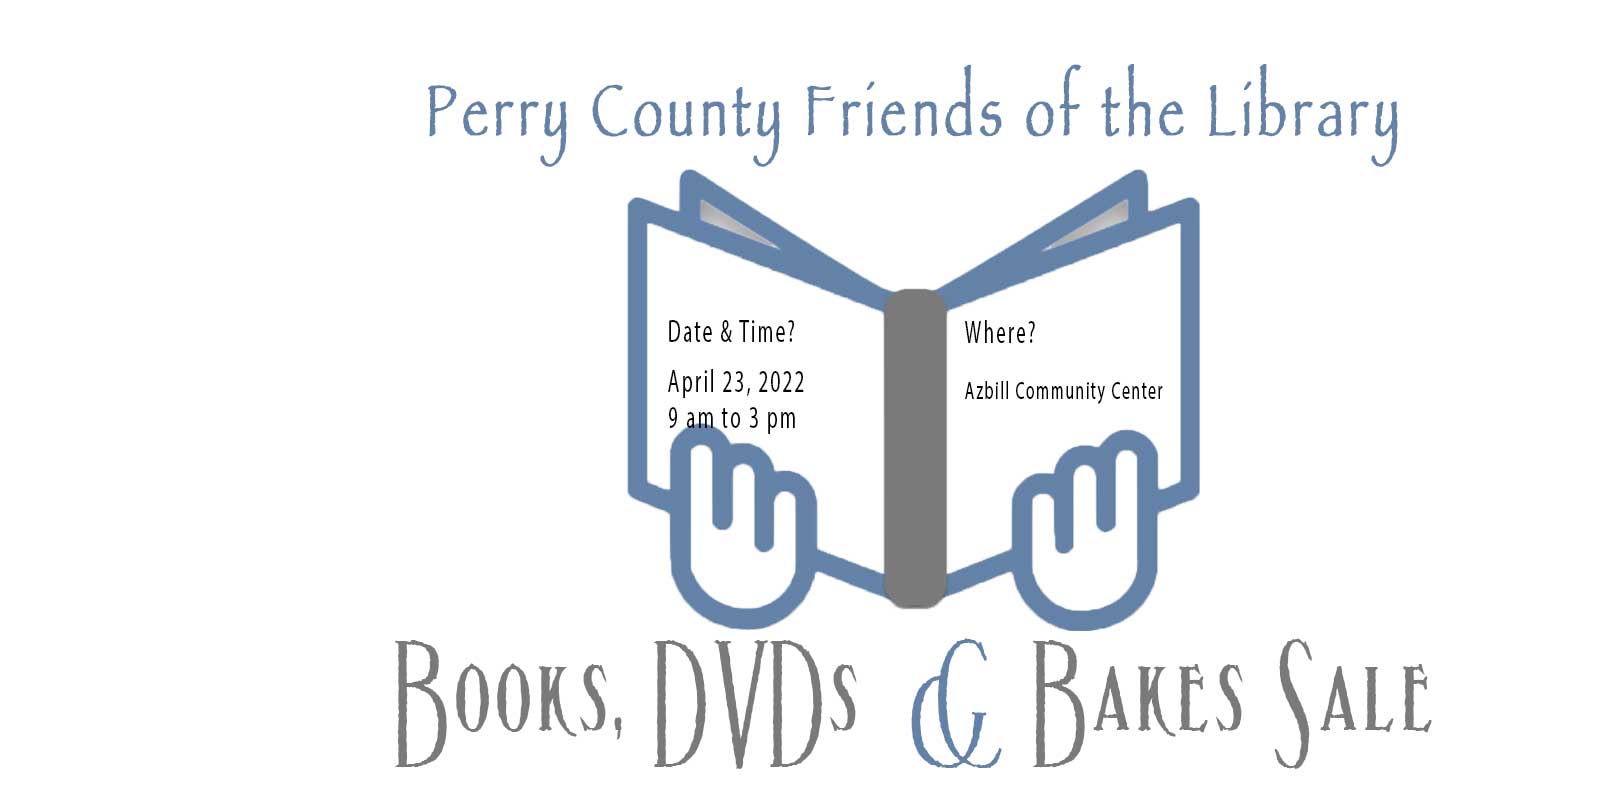 Books (and DVDs) & Bakes Sale April 23, 9 am to 3 pm